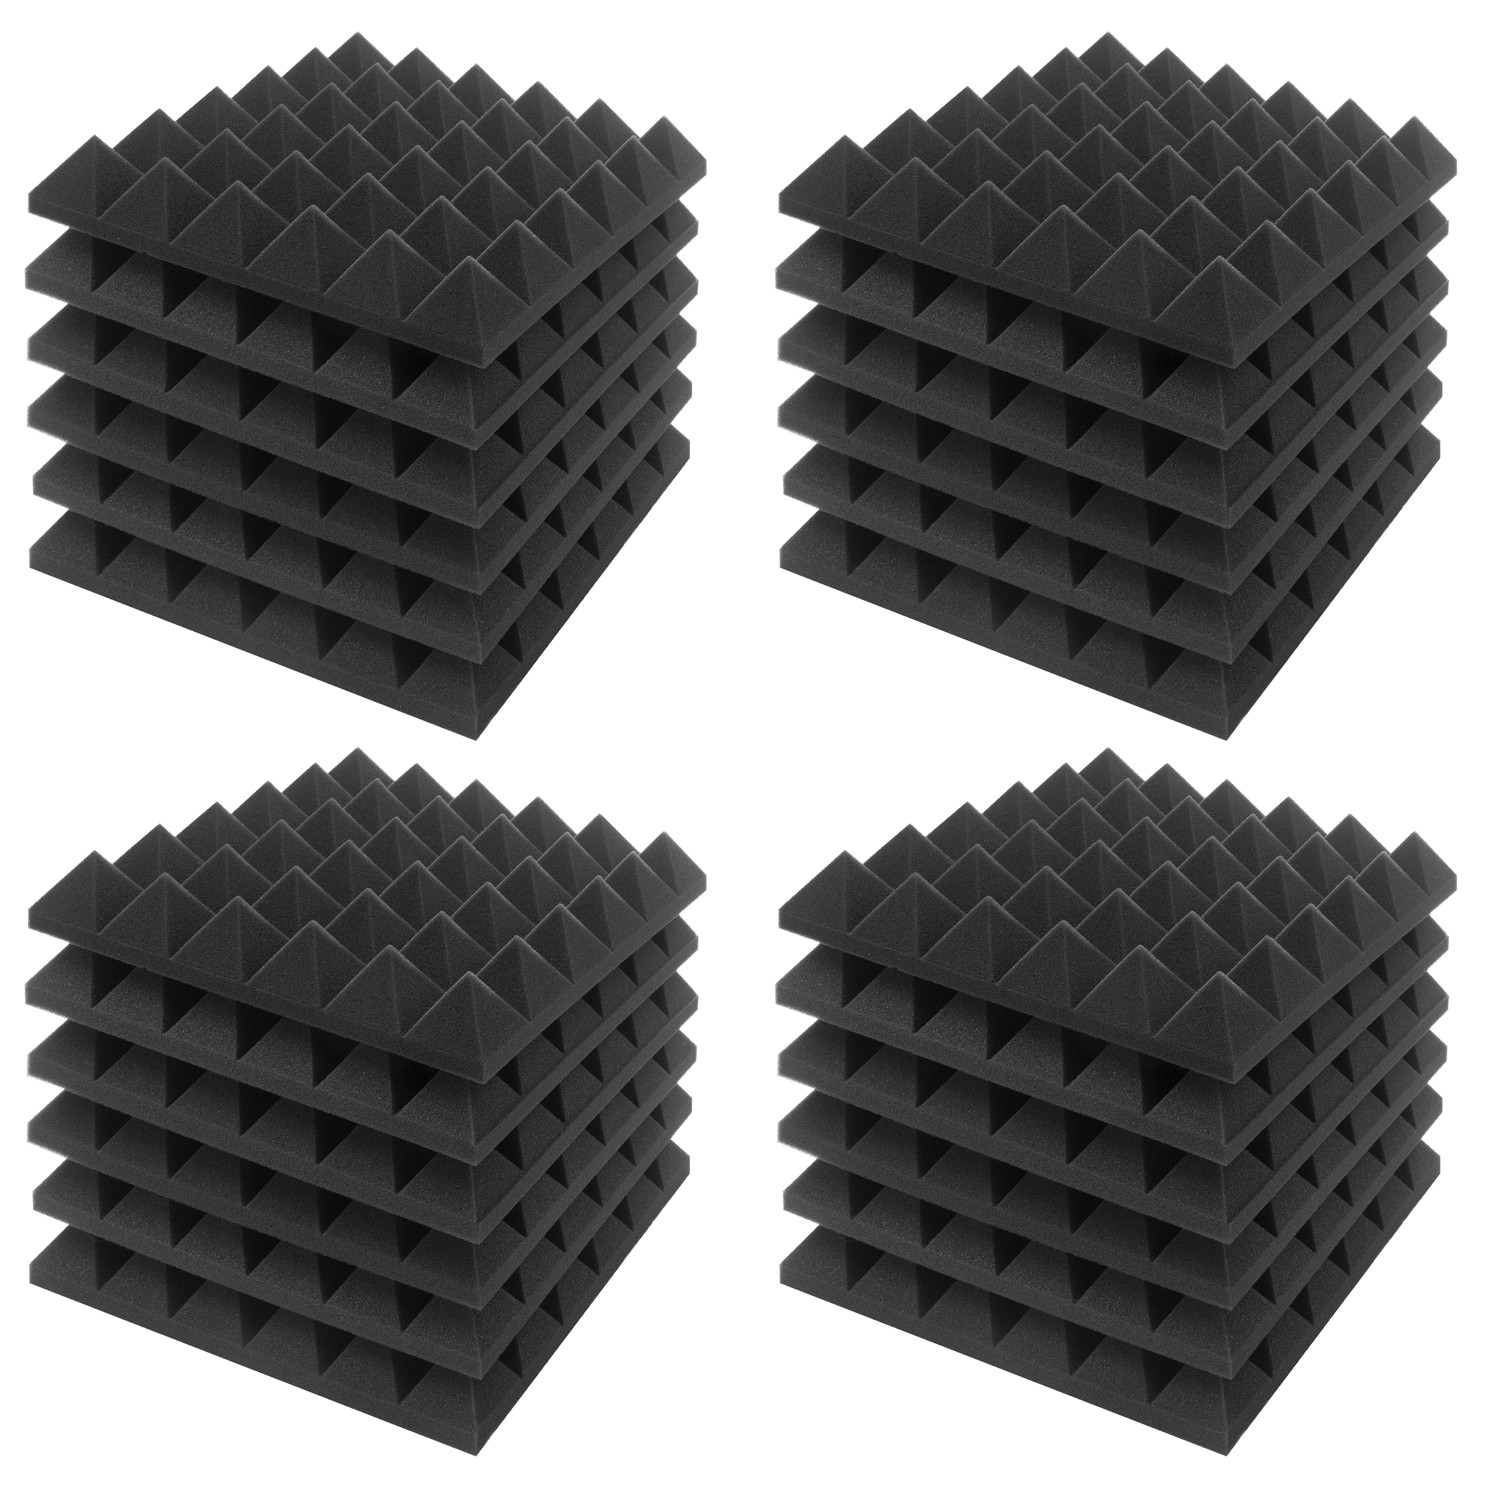 24pack, Black 24 Pack Acoustic Foam Panels 2 X 12 X 12 Soundproofing Studio Foam Wedge Tiles Fireproof Ideal for Home & Studio Sound Insulation Top Quality 